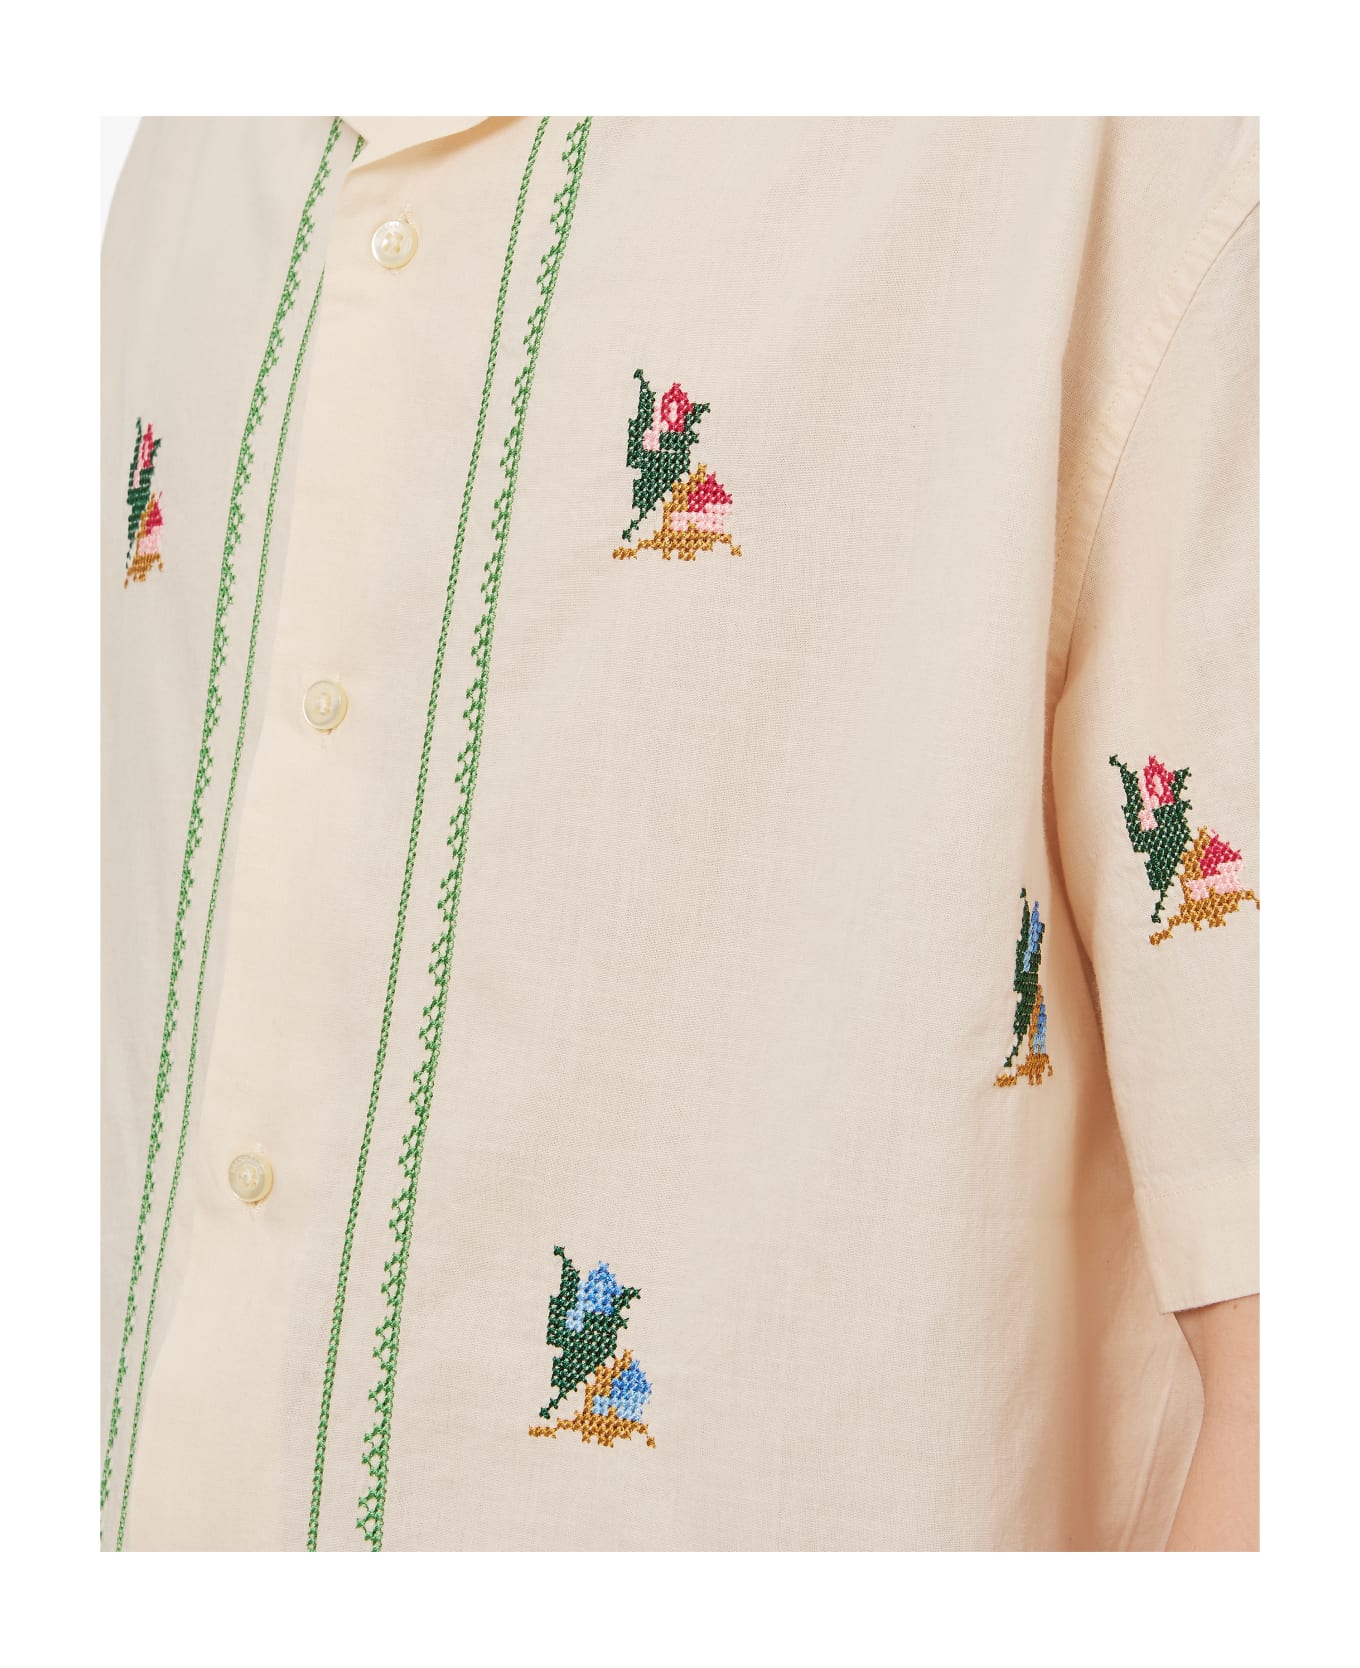 President's Rangi Over P's Flowers Embroidery Cotton Washed - Beige